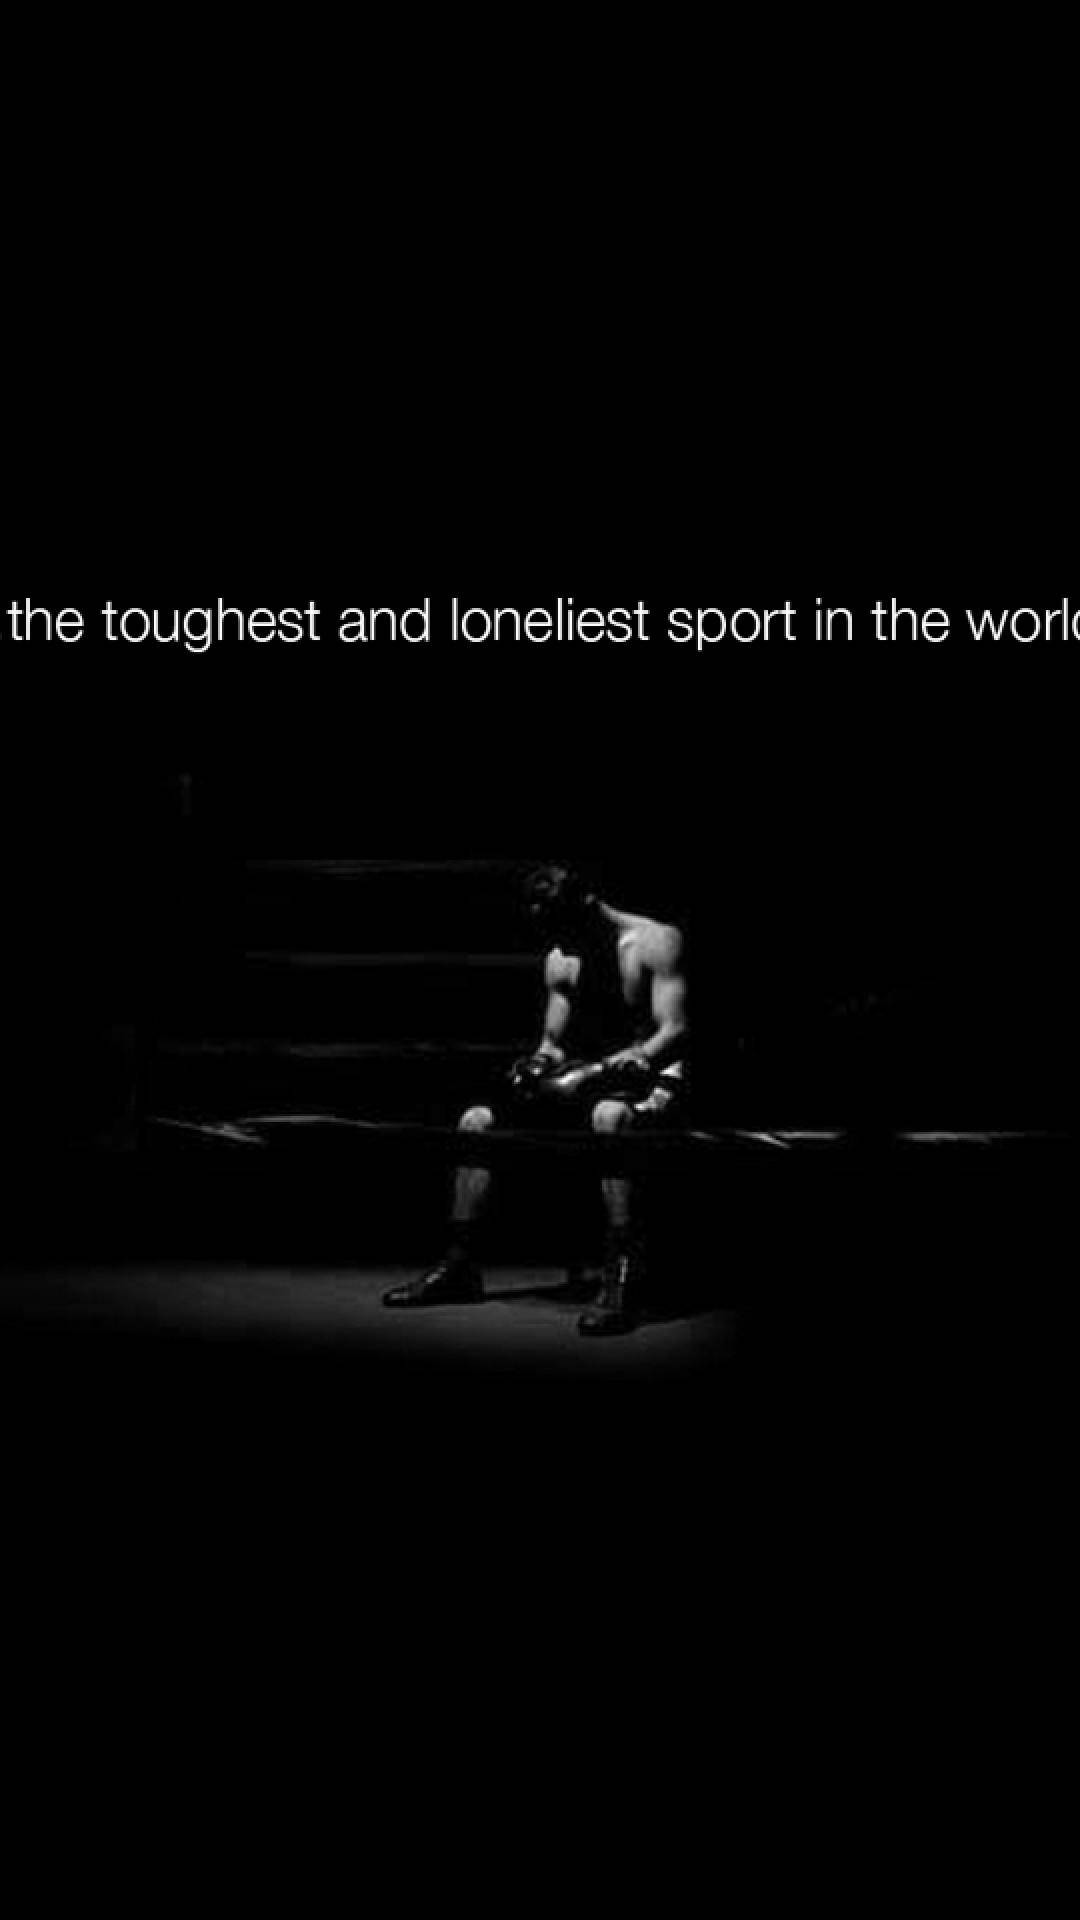 The Toughest And Lonely Sport In The World Wallpaper